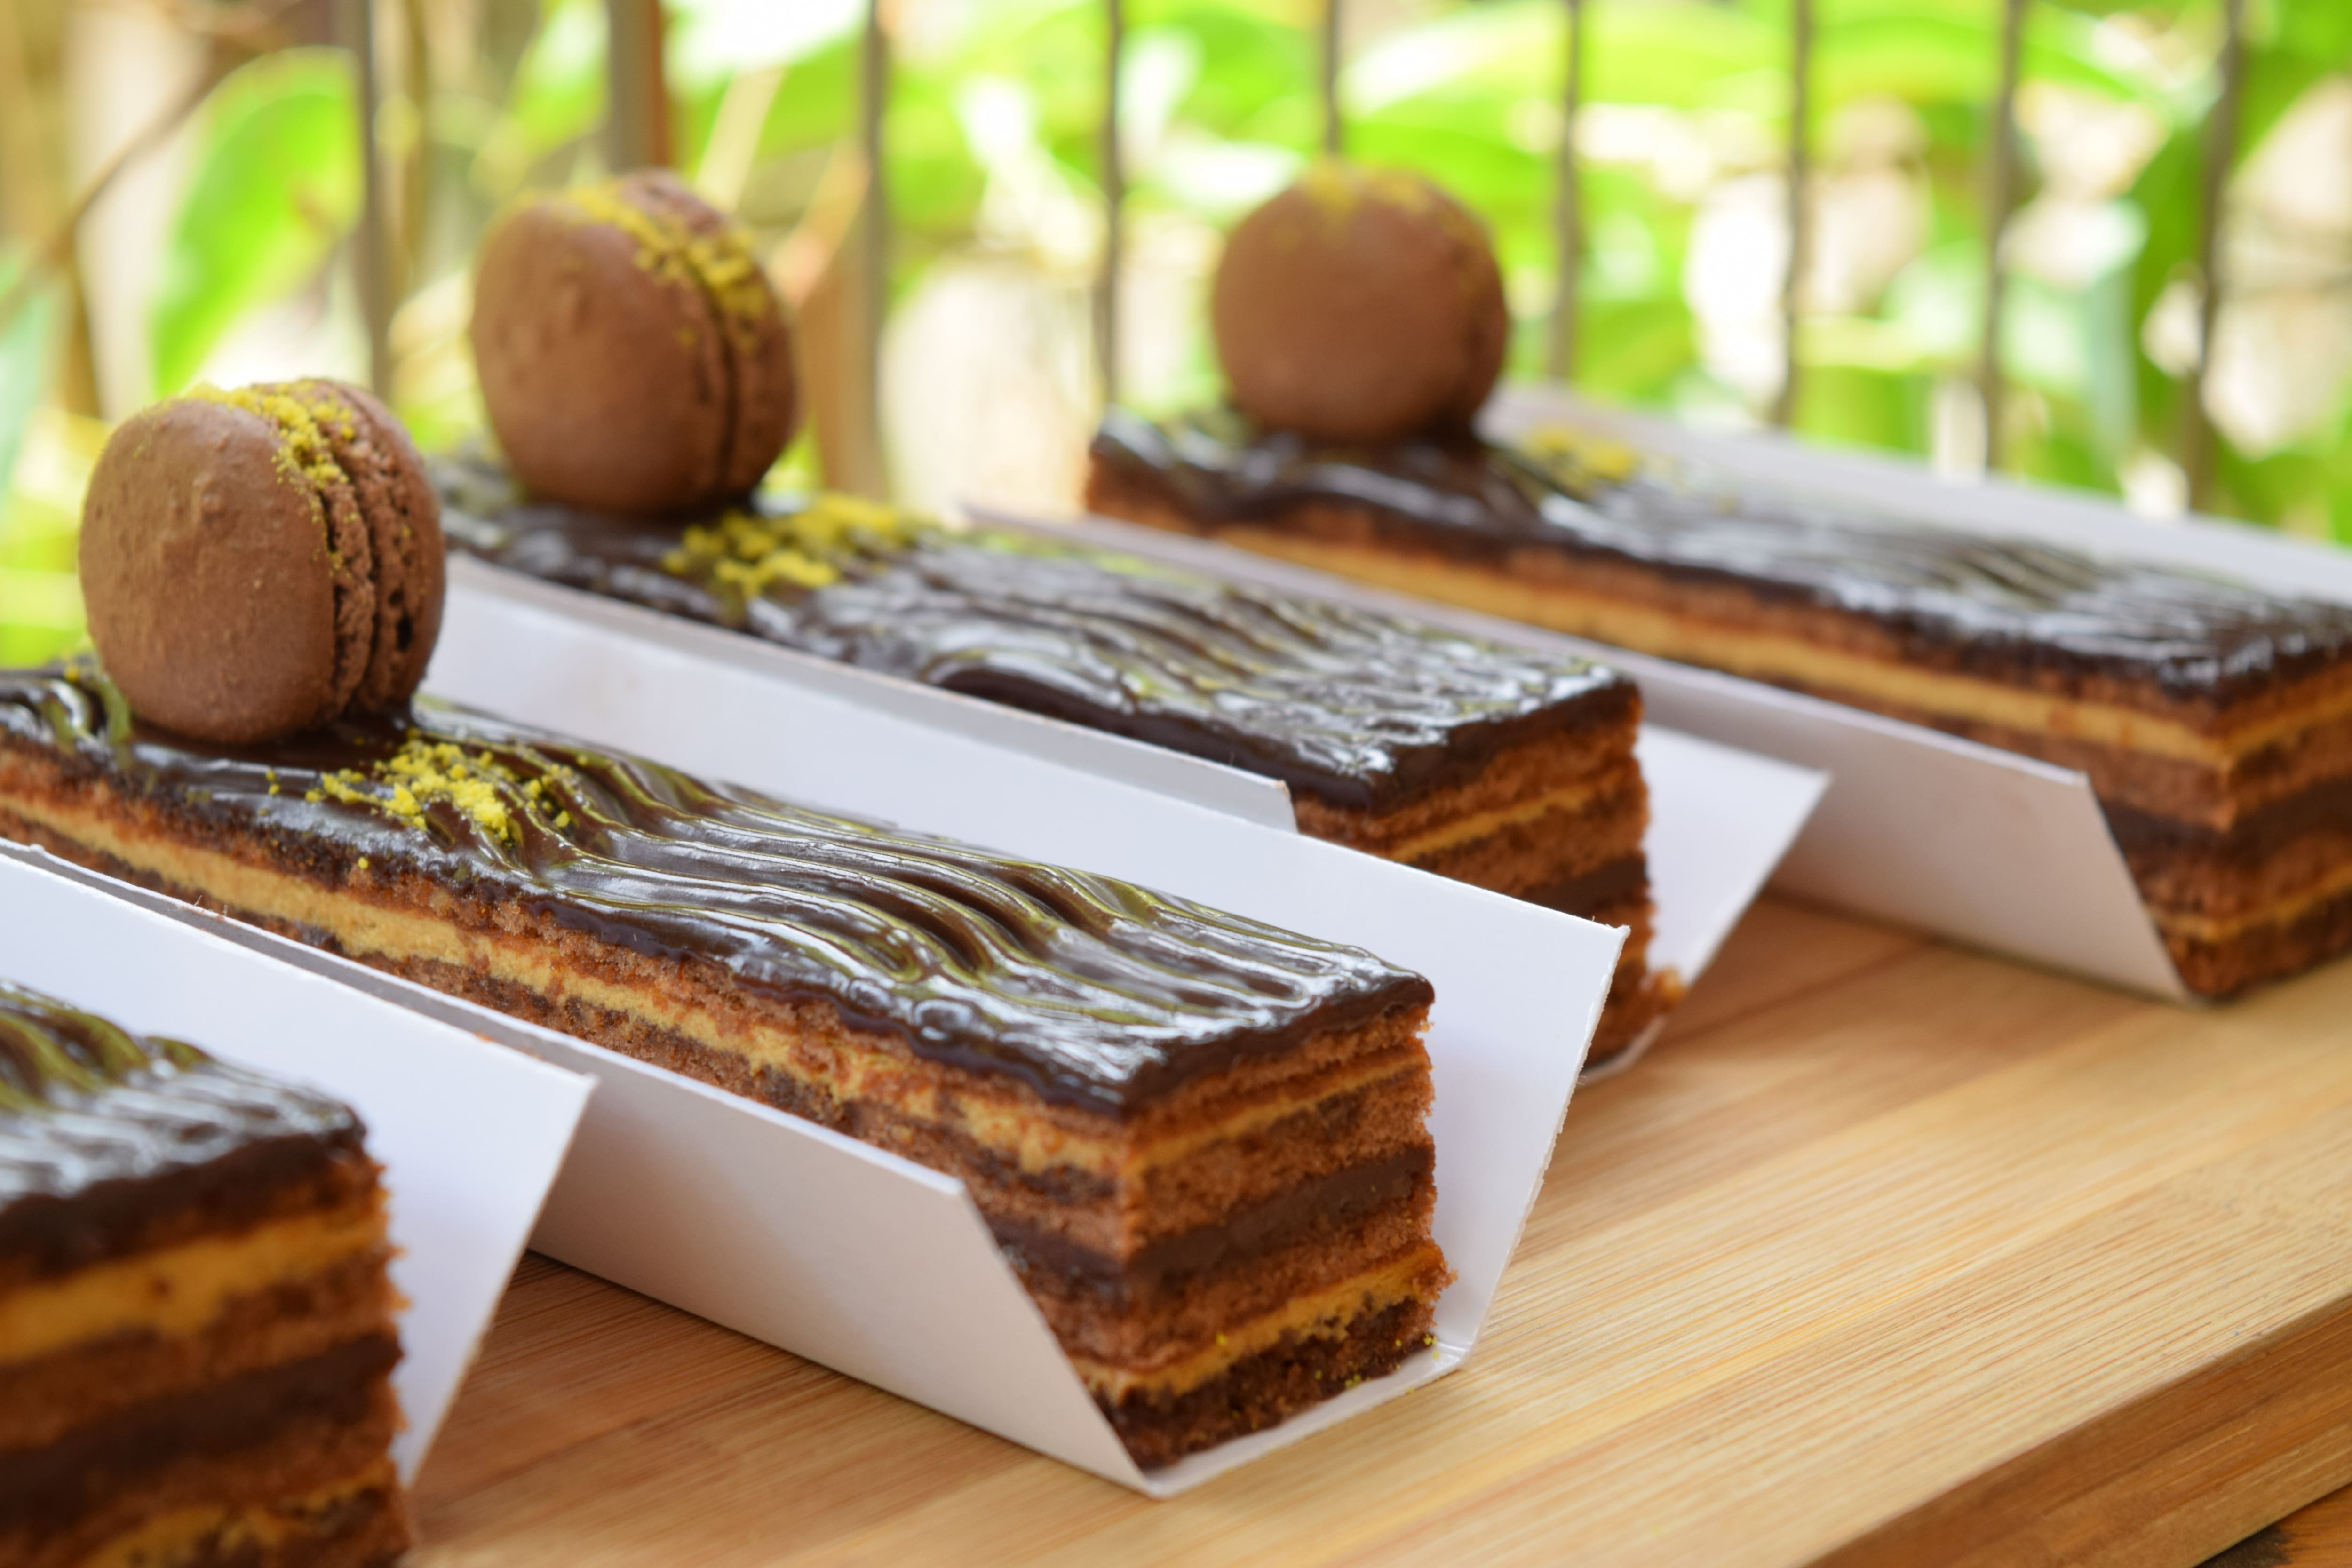 French Patisserie, Concu, Offers Delectable Savouries To The Hyderabadis